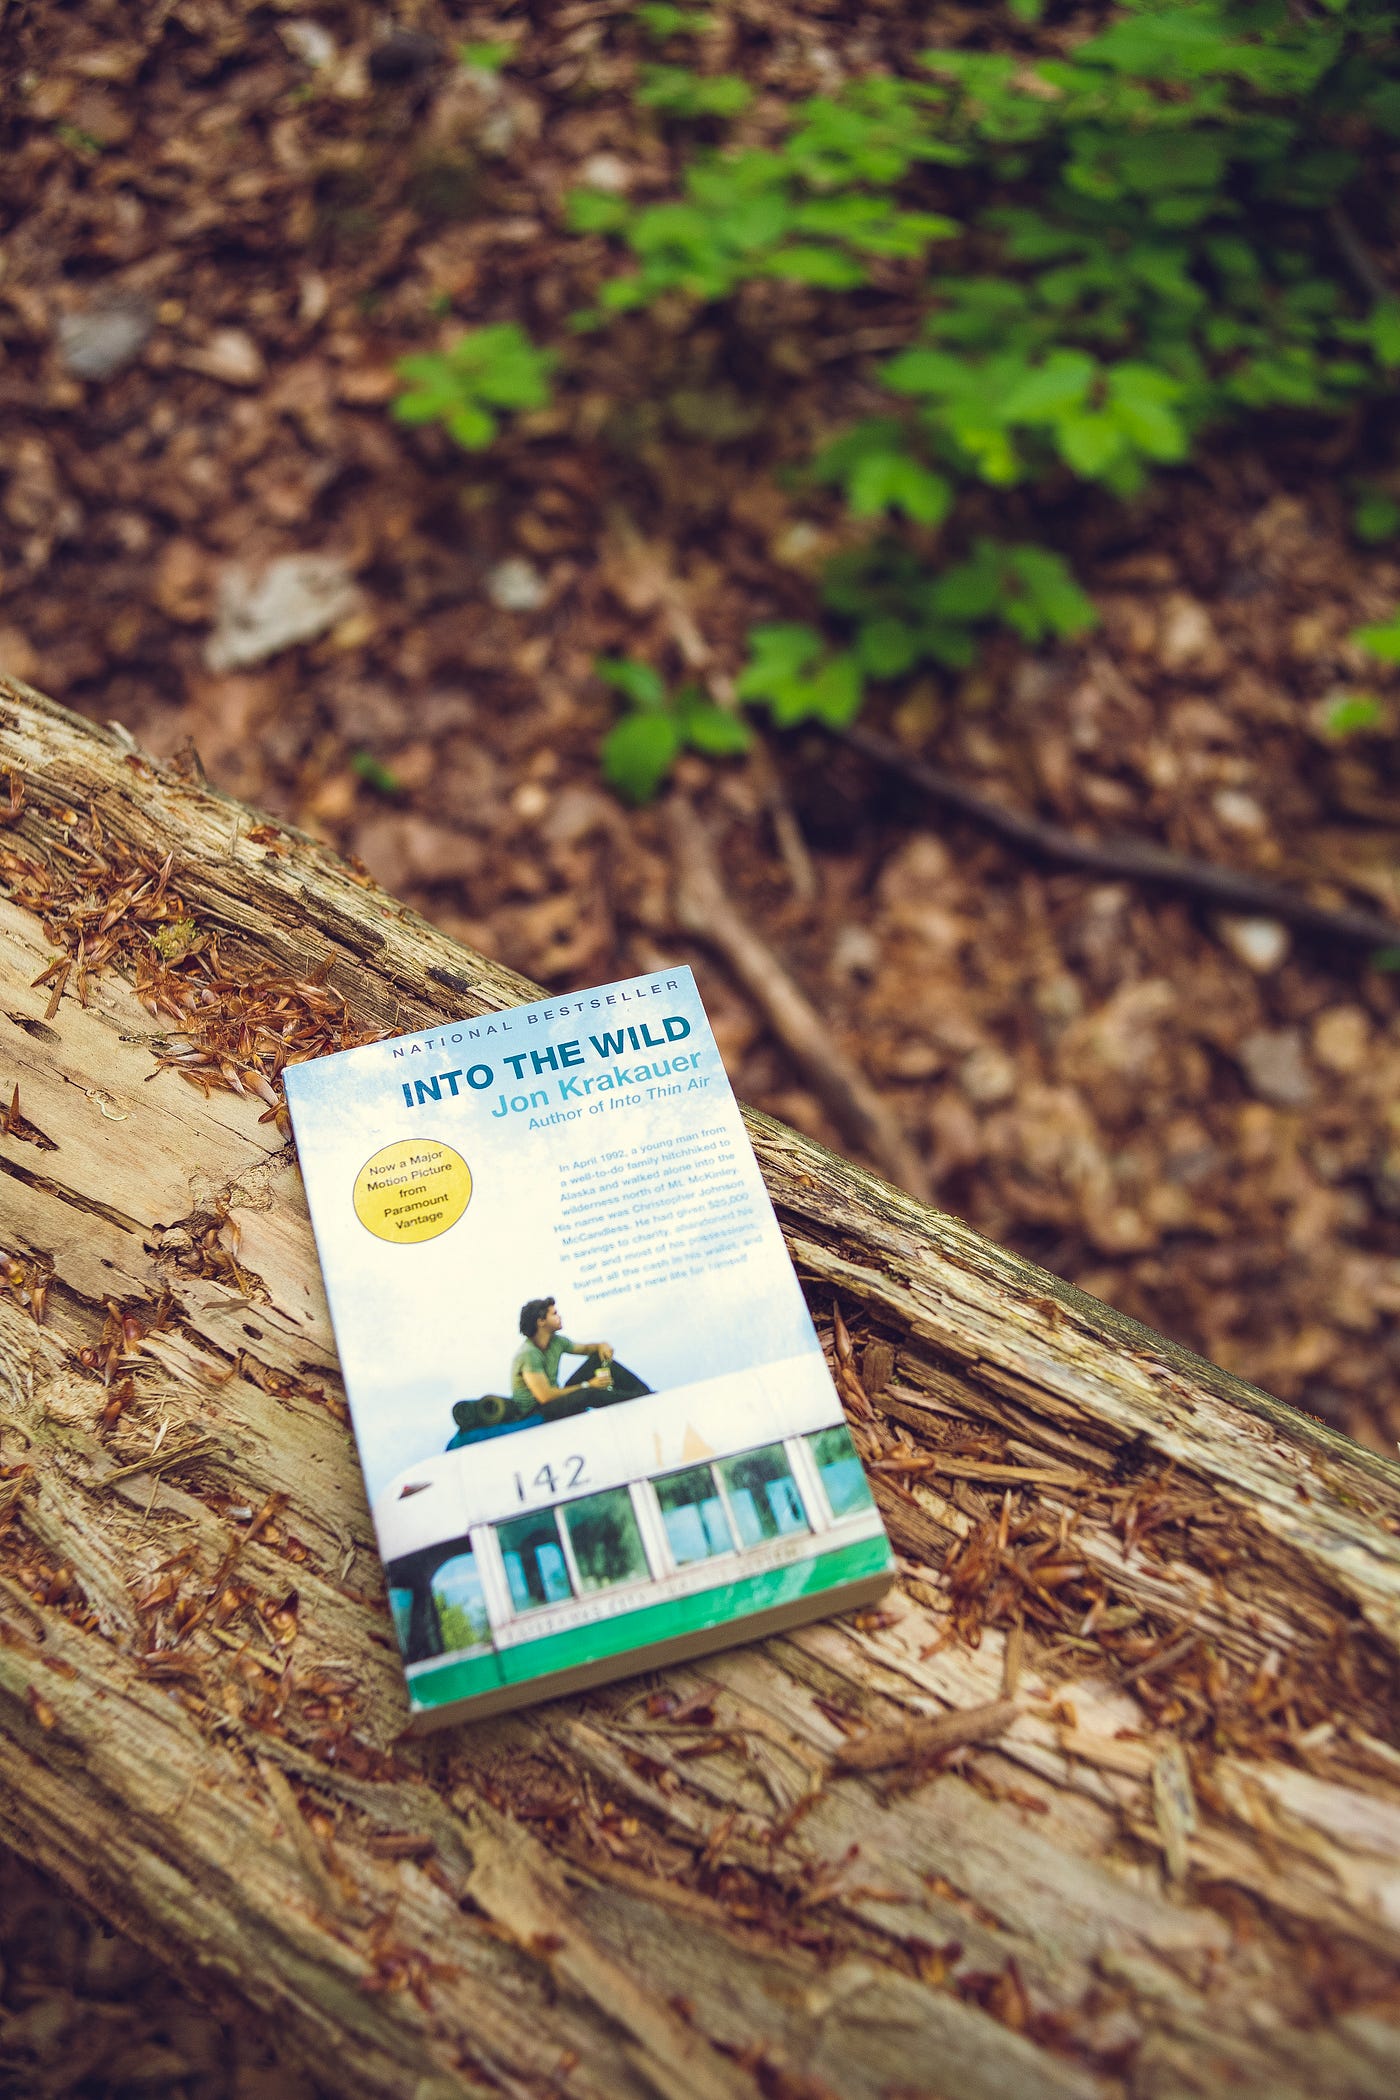 Why read Into the Wild?